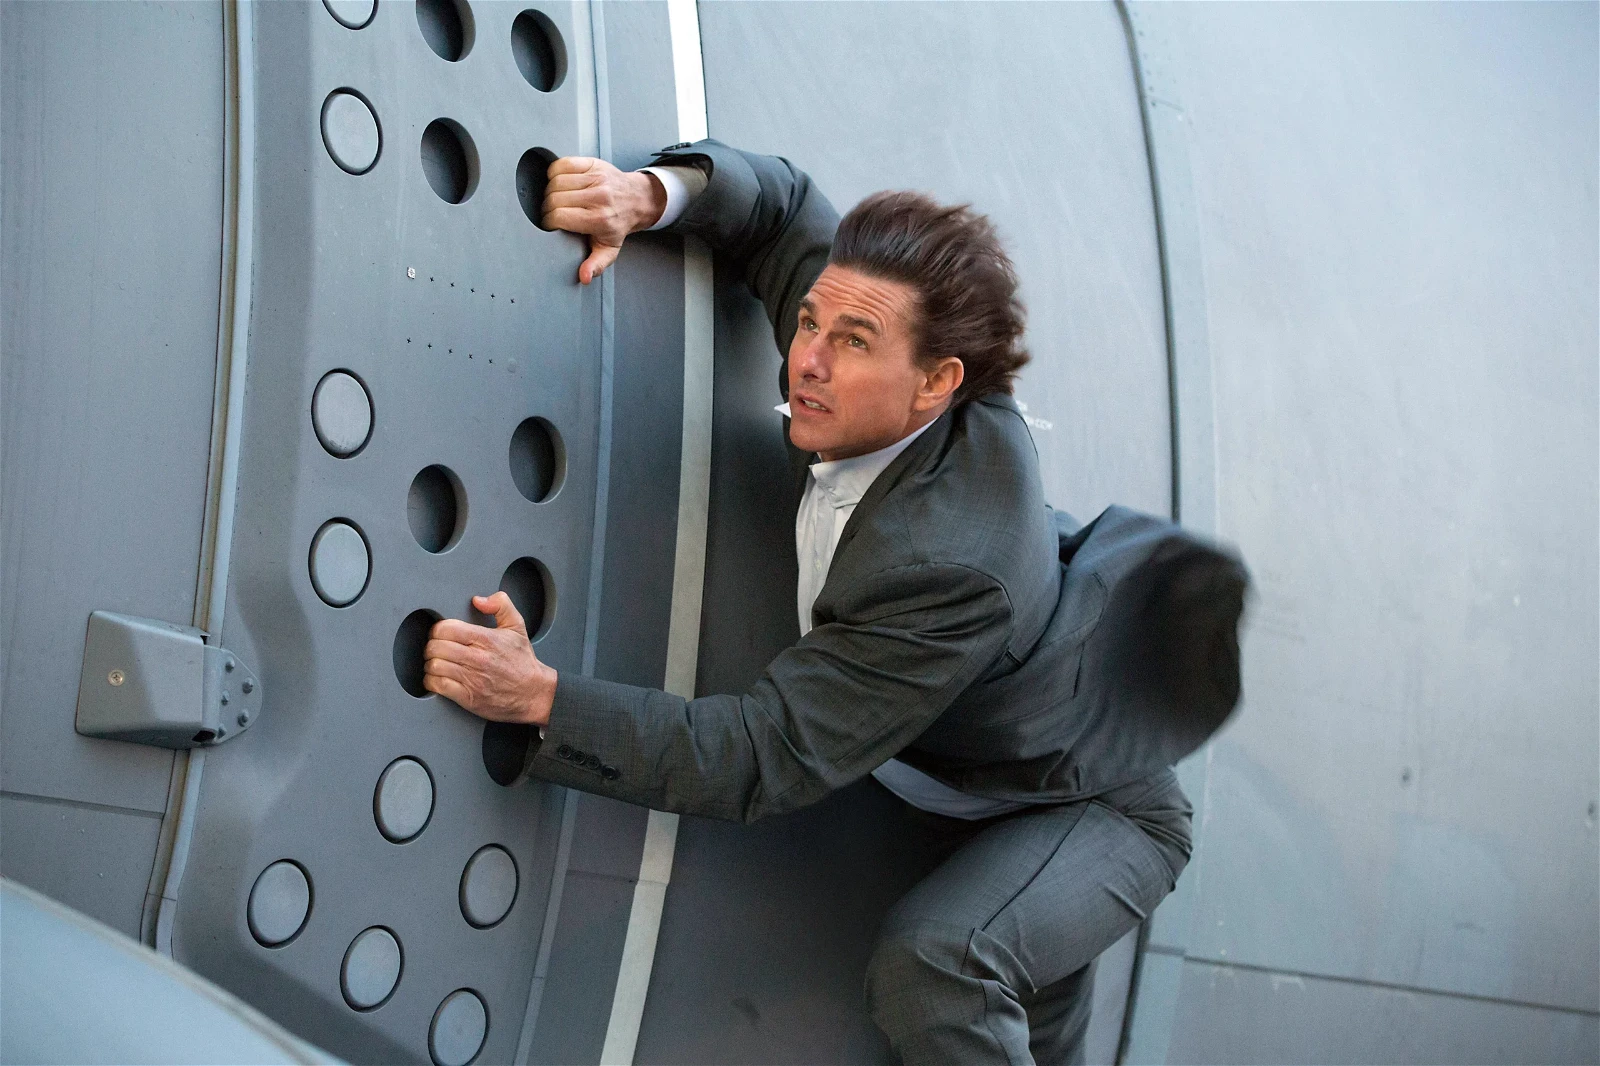 Tom Cruise as Ethan Hunt in Mission: Impossible - Rogue Nation (2015).